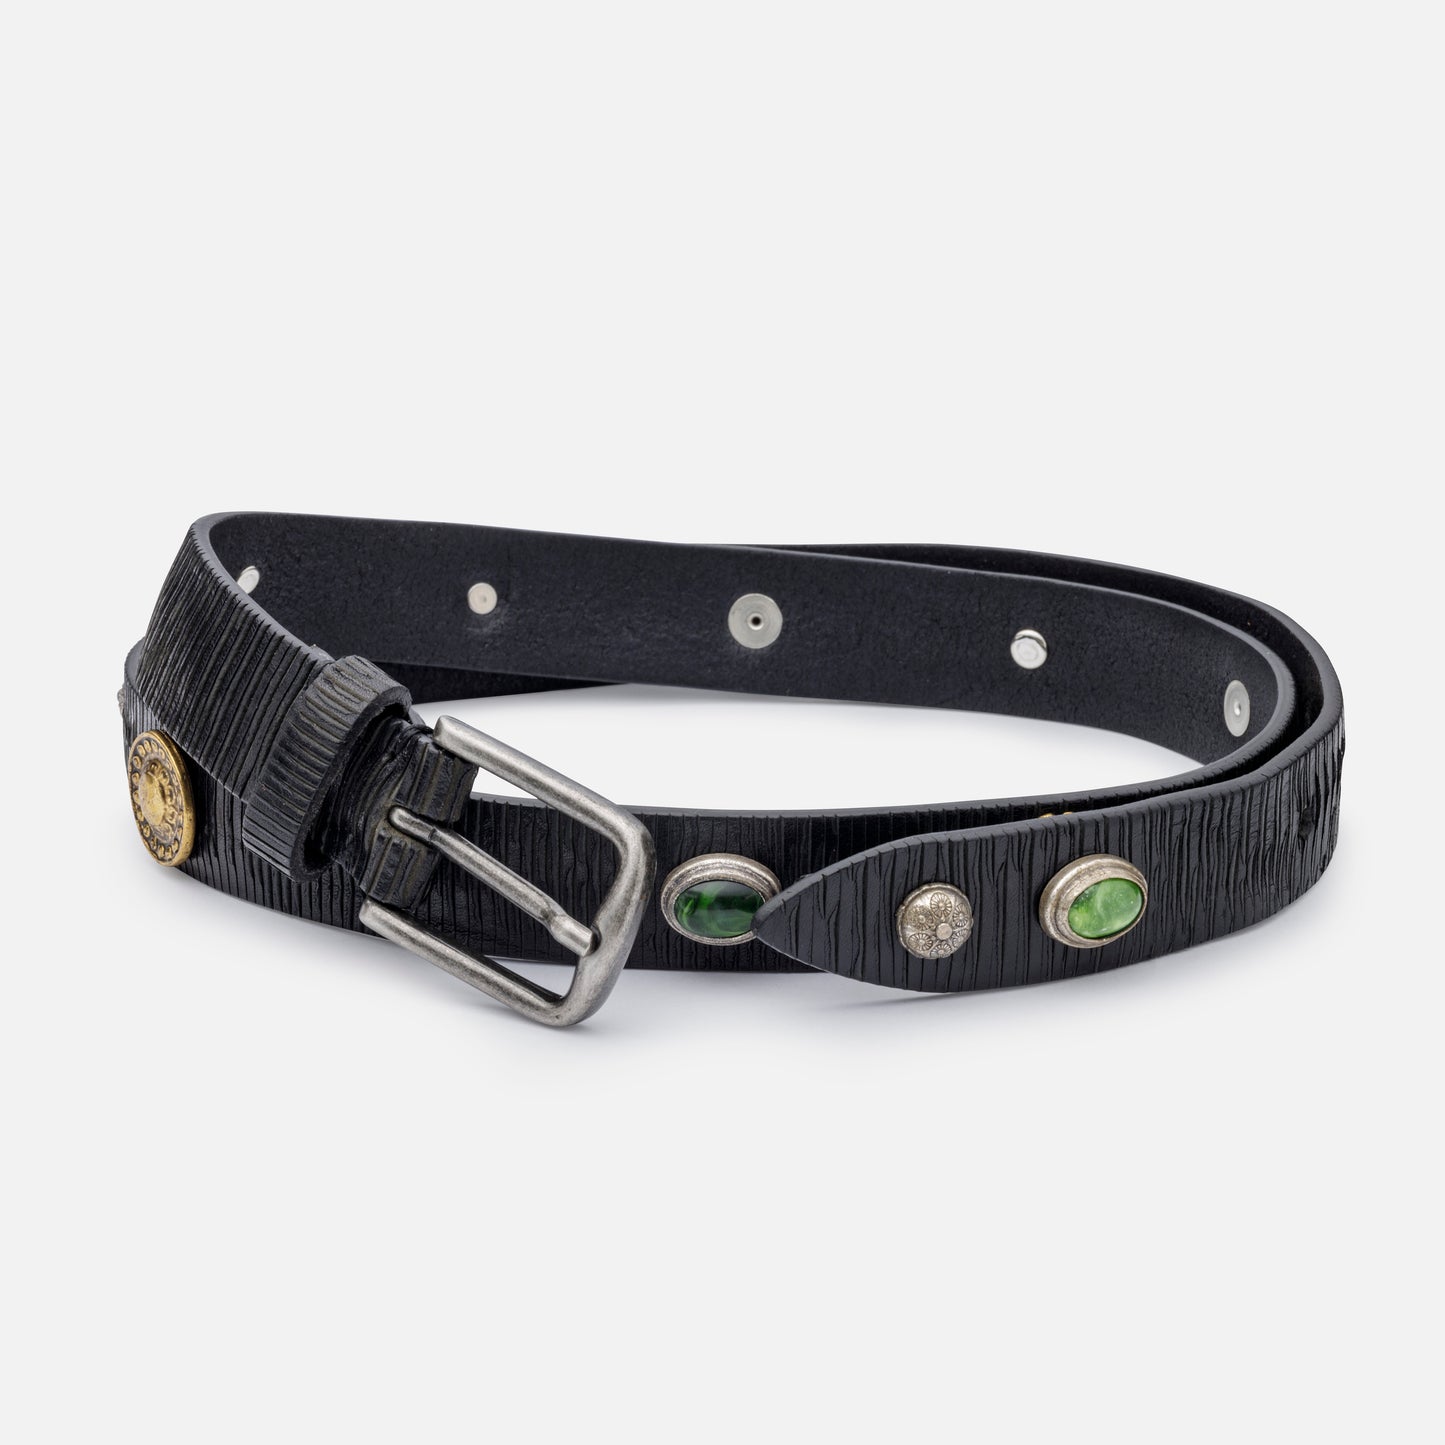 BLADE LUX LEATHER BELTS BLACK WITH STUDS AND ENGLISH SILVER BUCKLE  H 2,5 cm